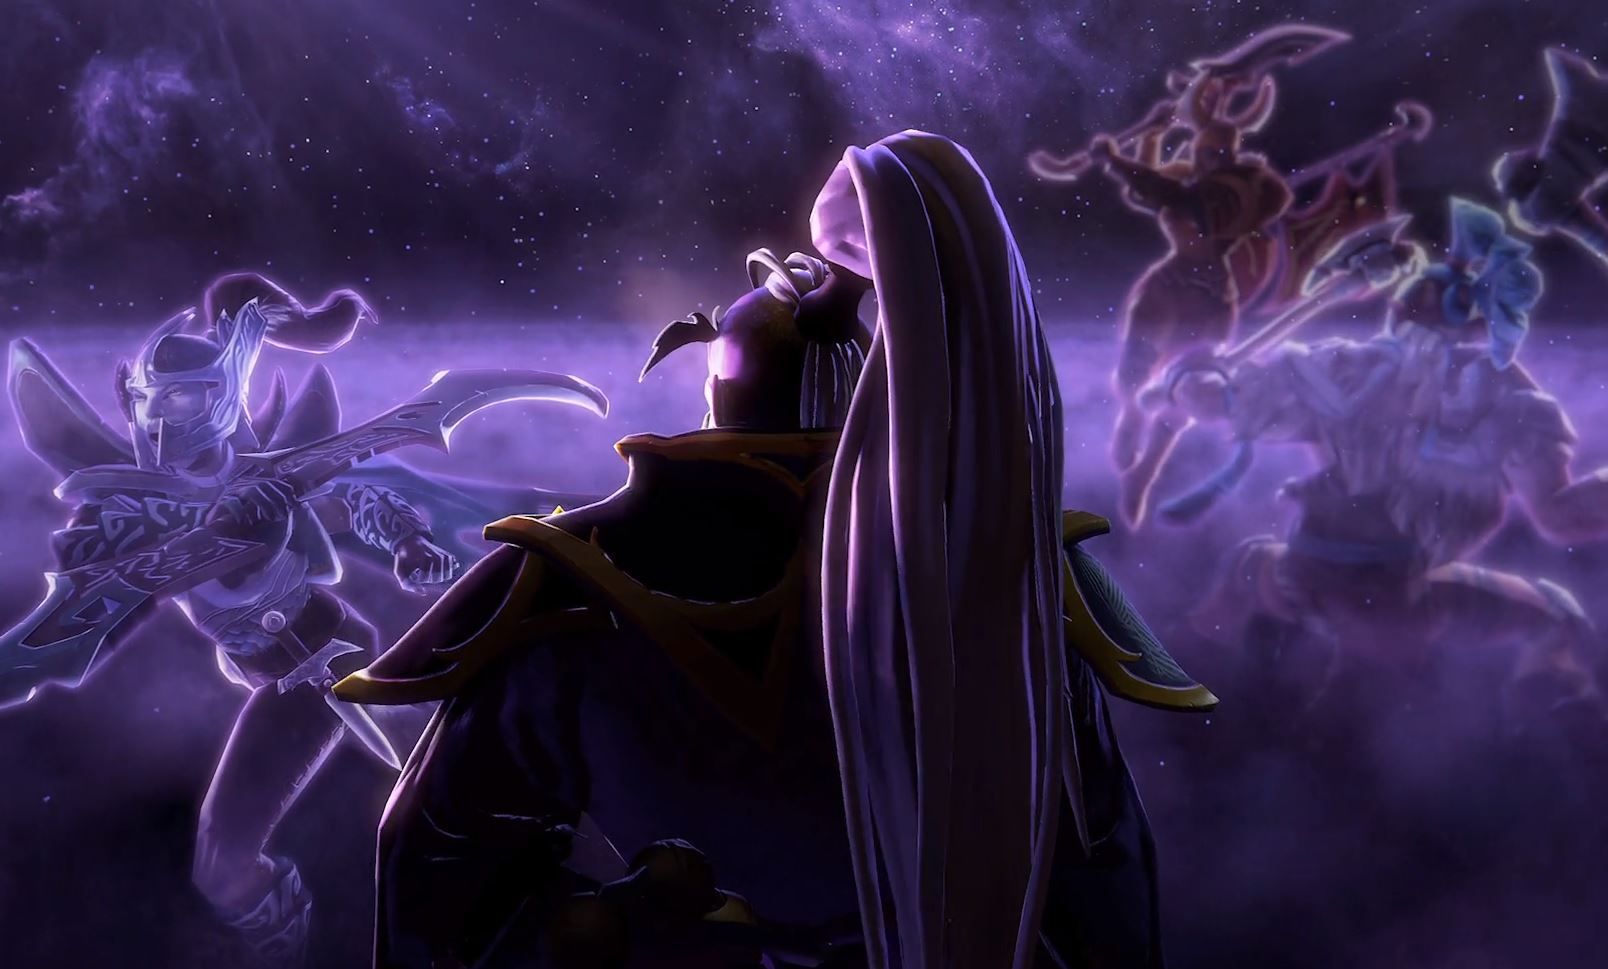 TI9: Void Spirit is the second hero announced to come to Dota 2